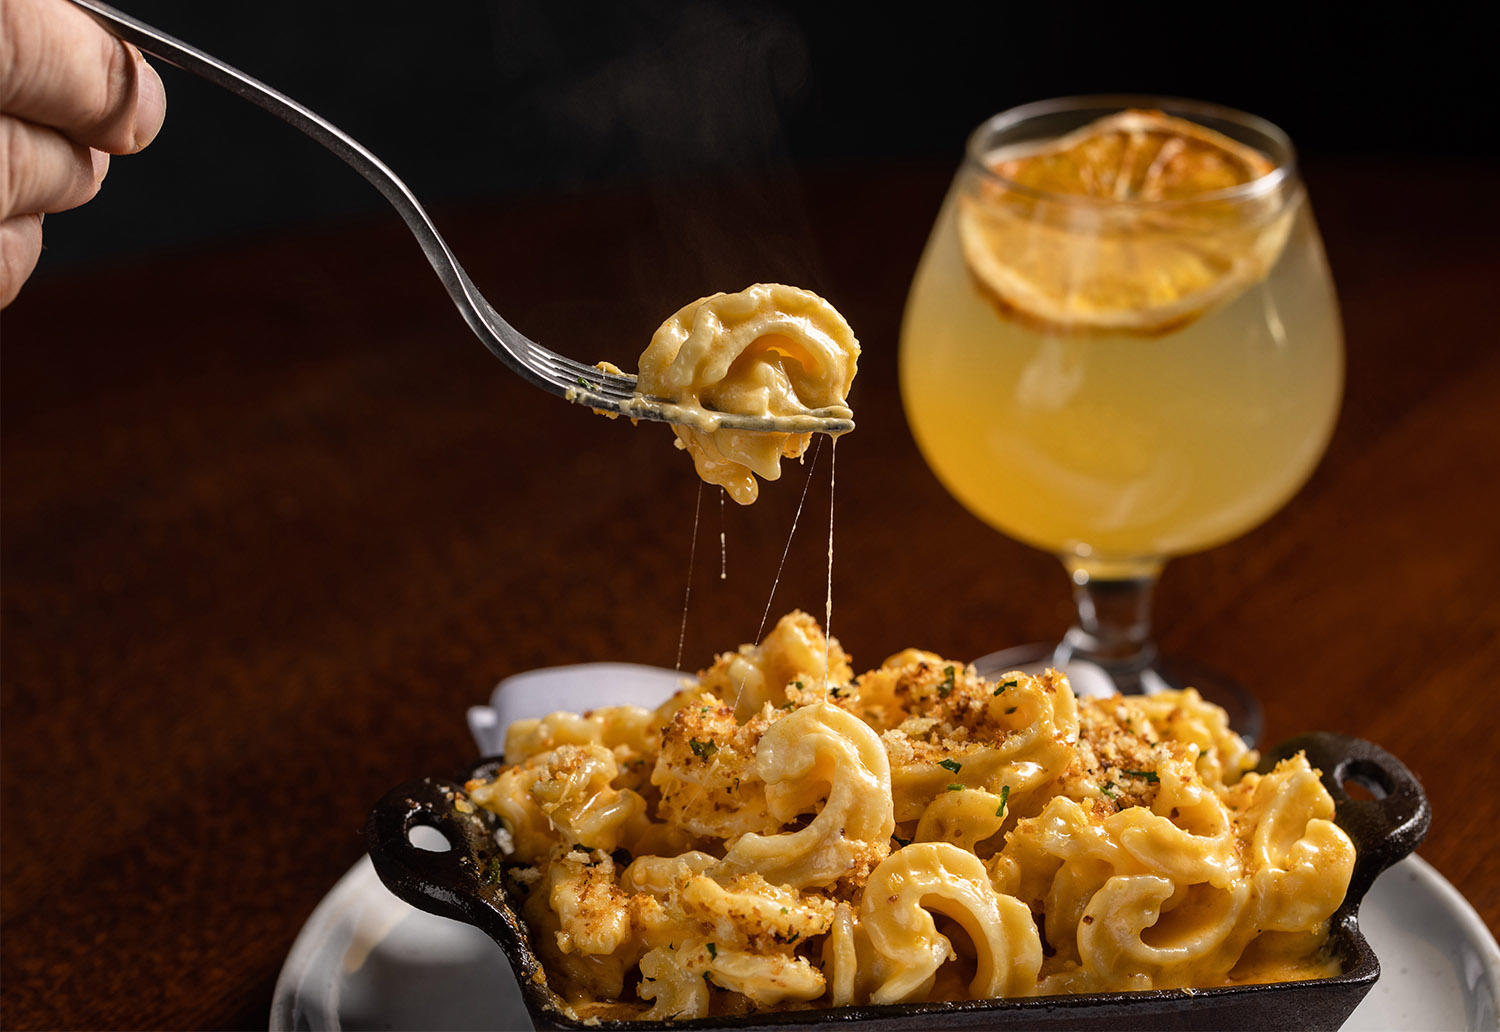 The Independent's Cascatellii Mac & Cheese on a wooden table